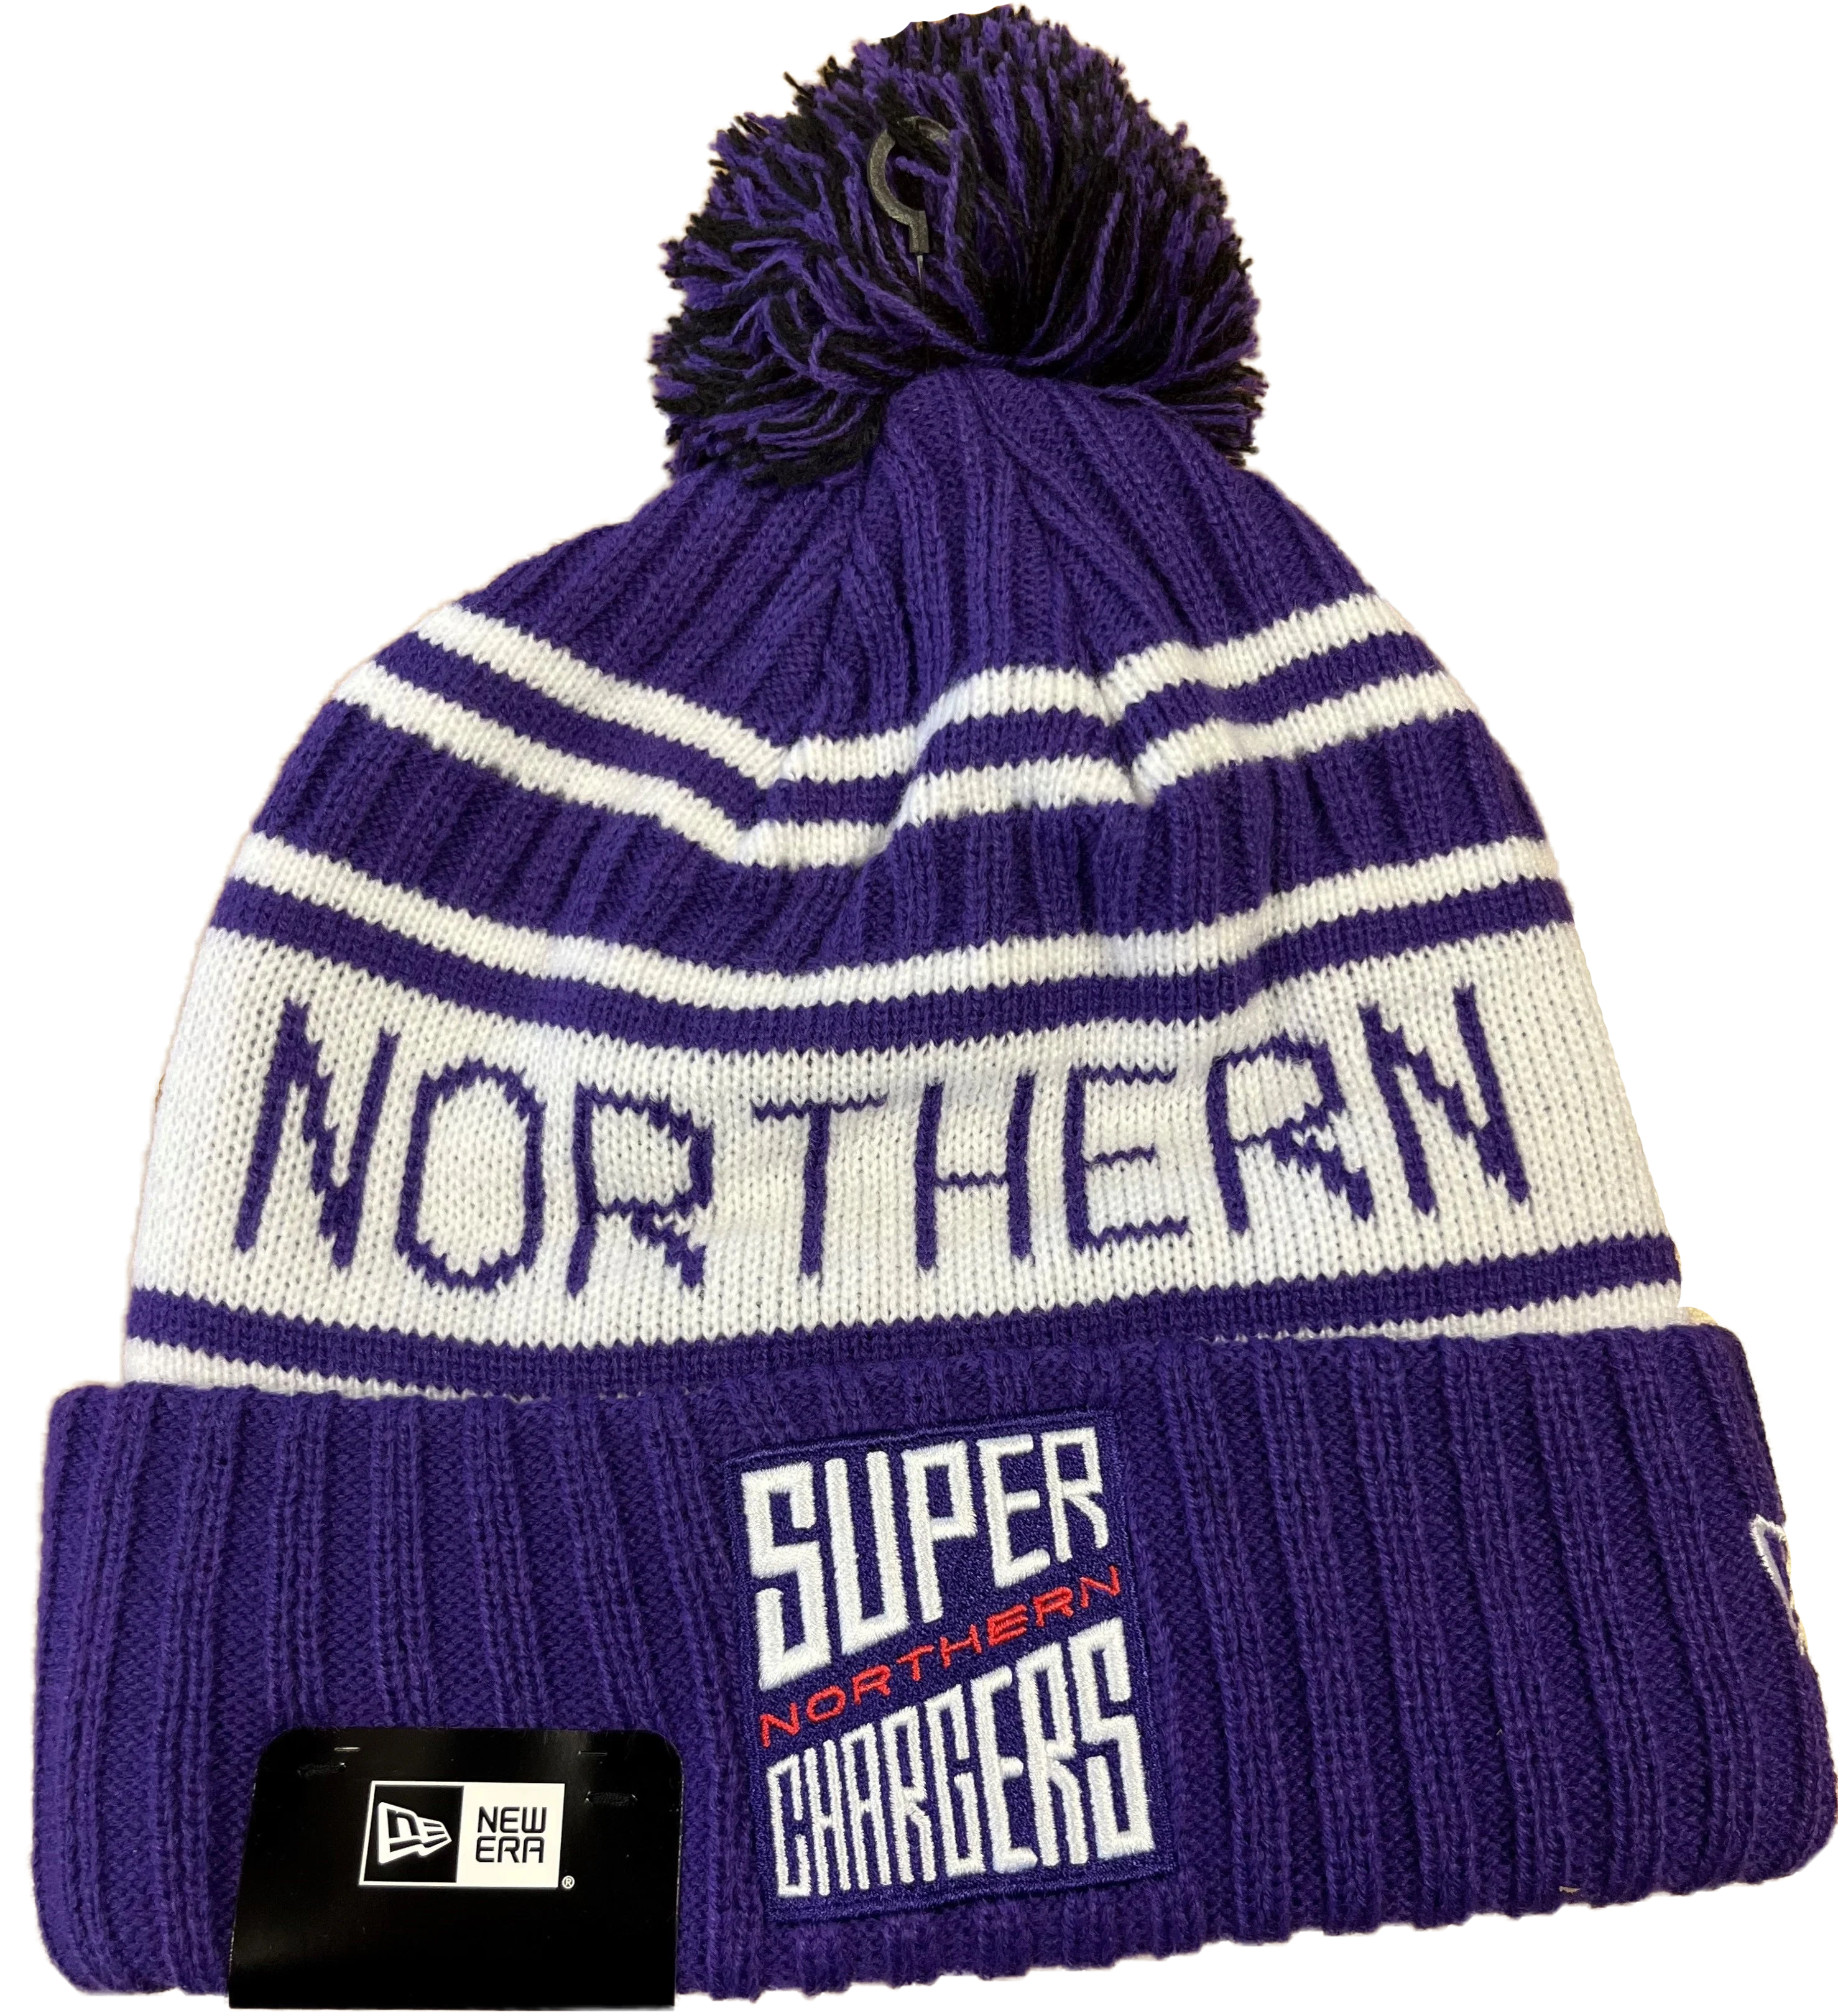 Northern Superchargers bobble hat